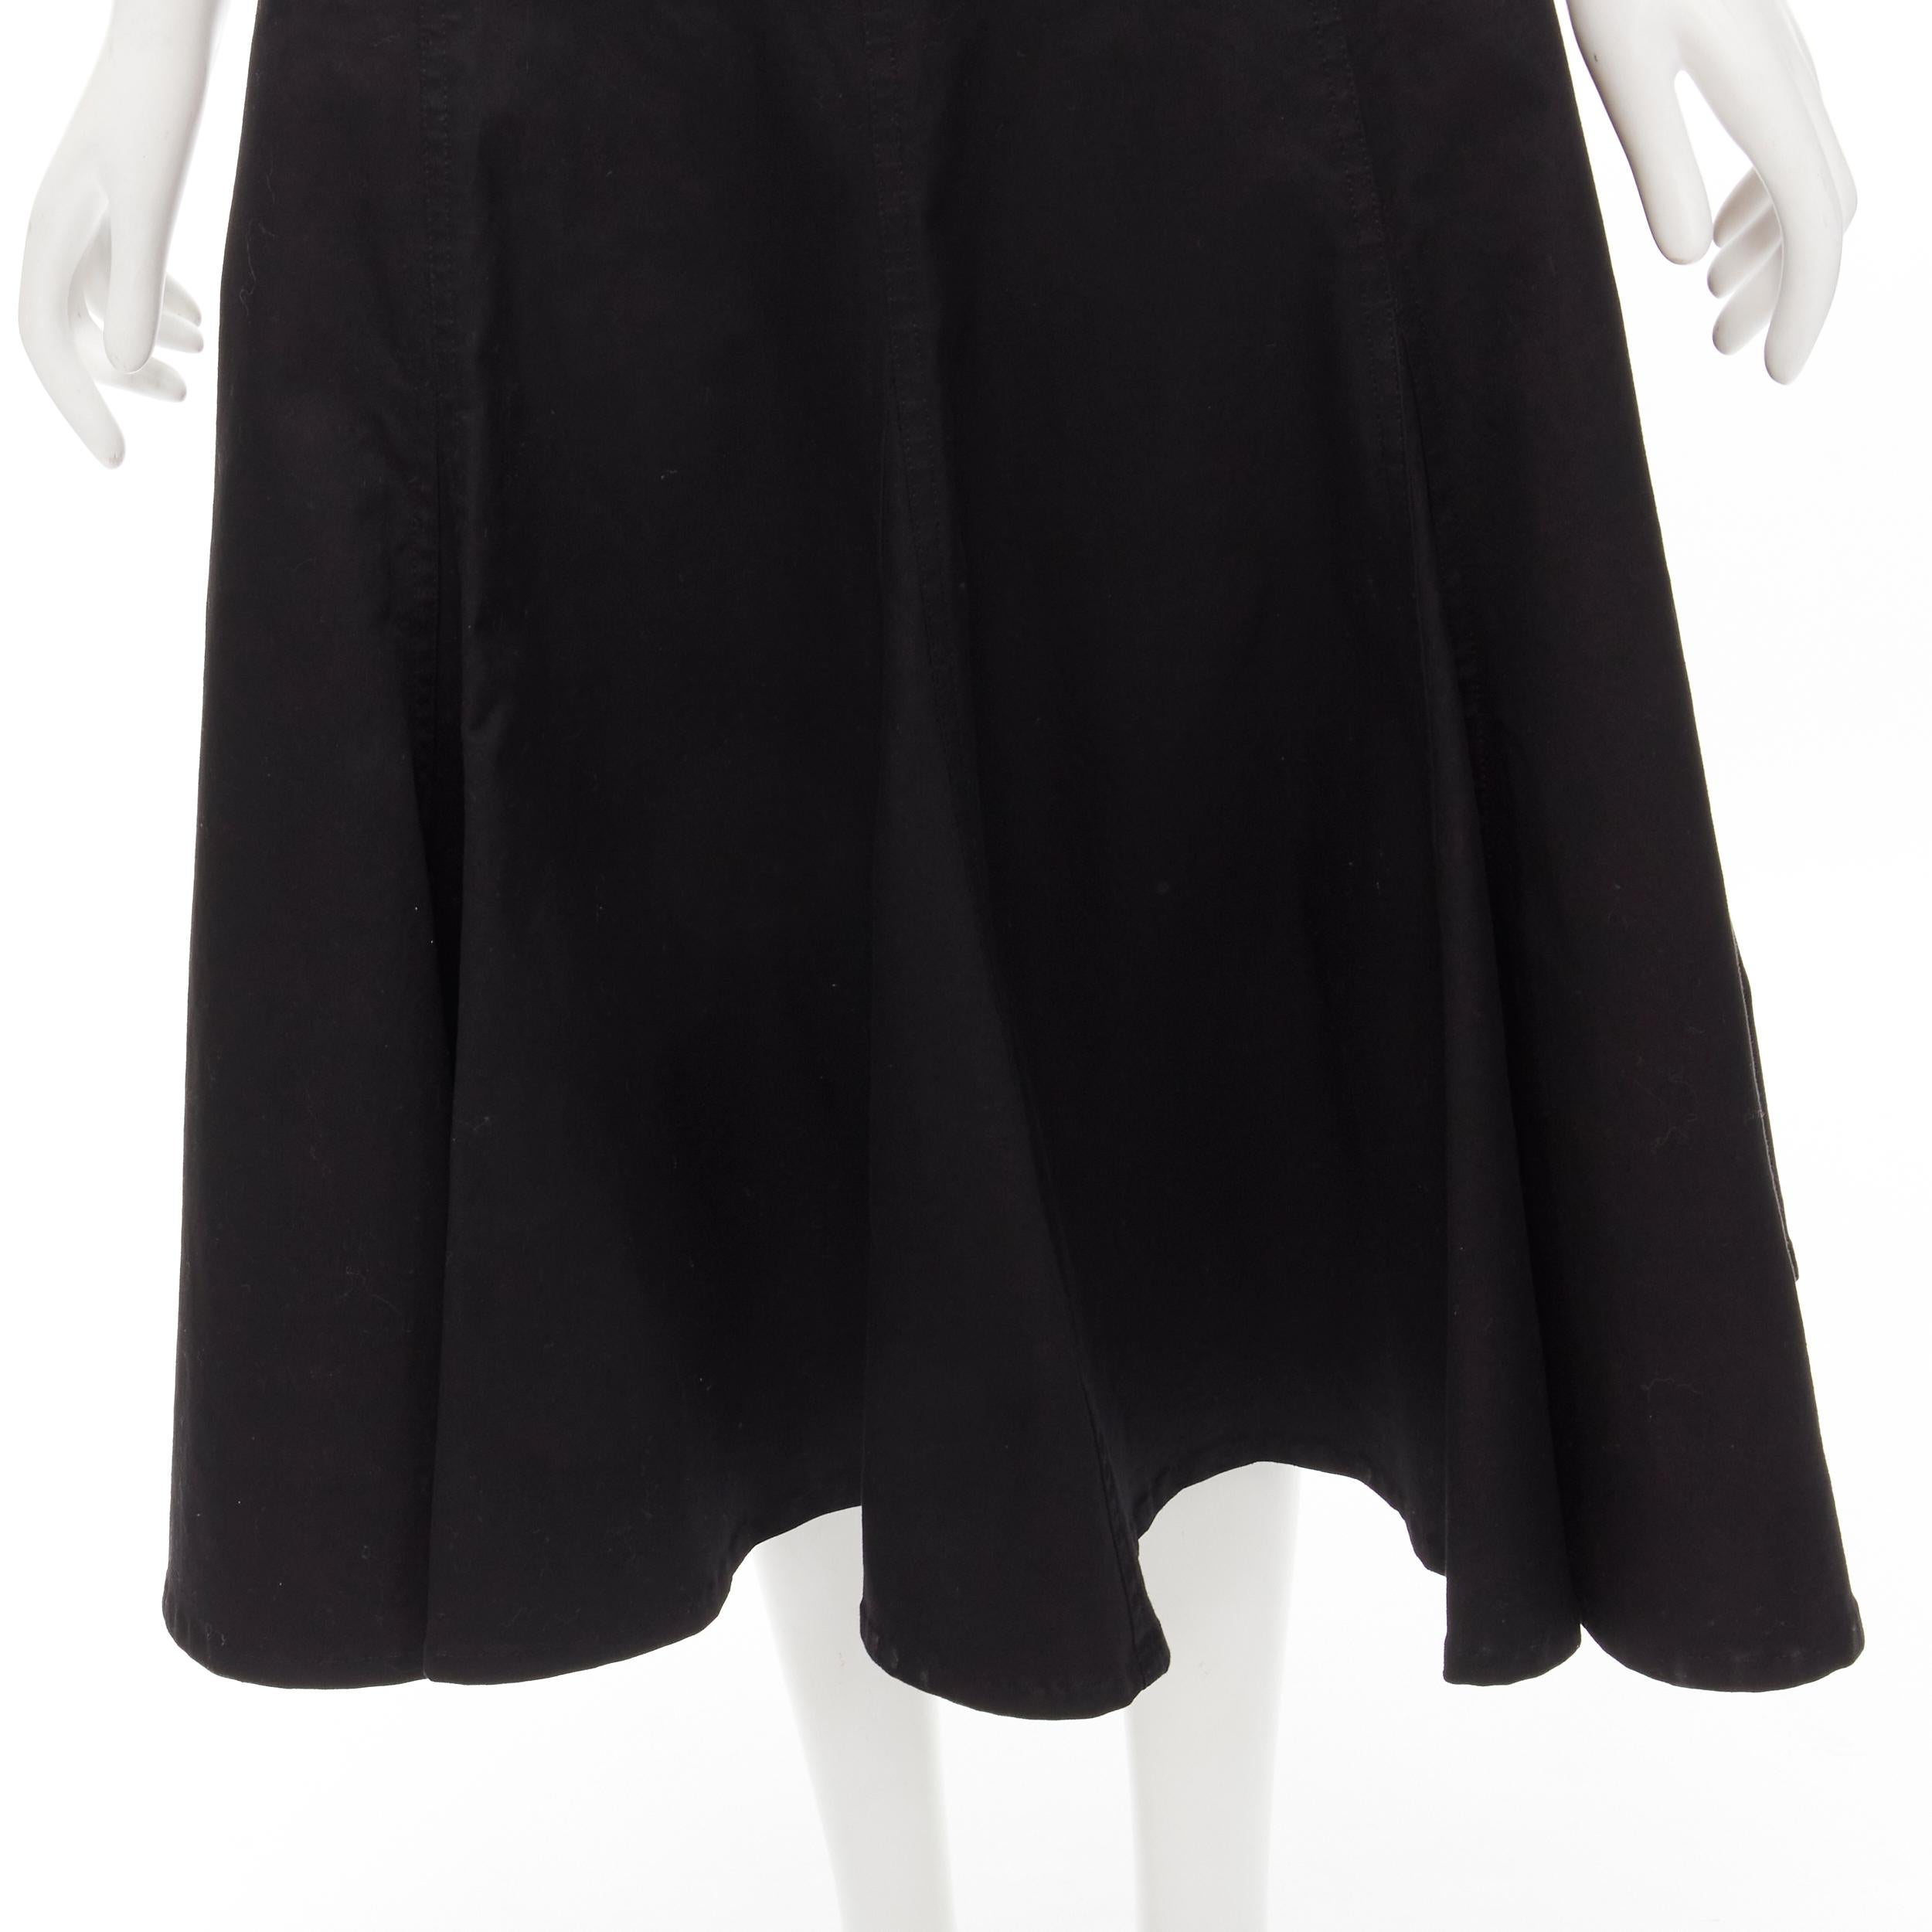 YOHJI YAMAMOTO black heavy cotton flared midi skirt JP2 M 
Reference: AEMA/A00107 
Brand: Yohji Yamamoto 
Material: Cotton 
Color: Black 
Pattern: Solid 
Closure: Zip 
Made in: Japan 

CONDITION: 
Condition: Excellent, this item was pre-owned and is